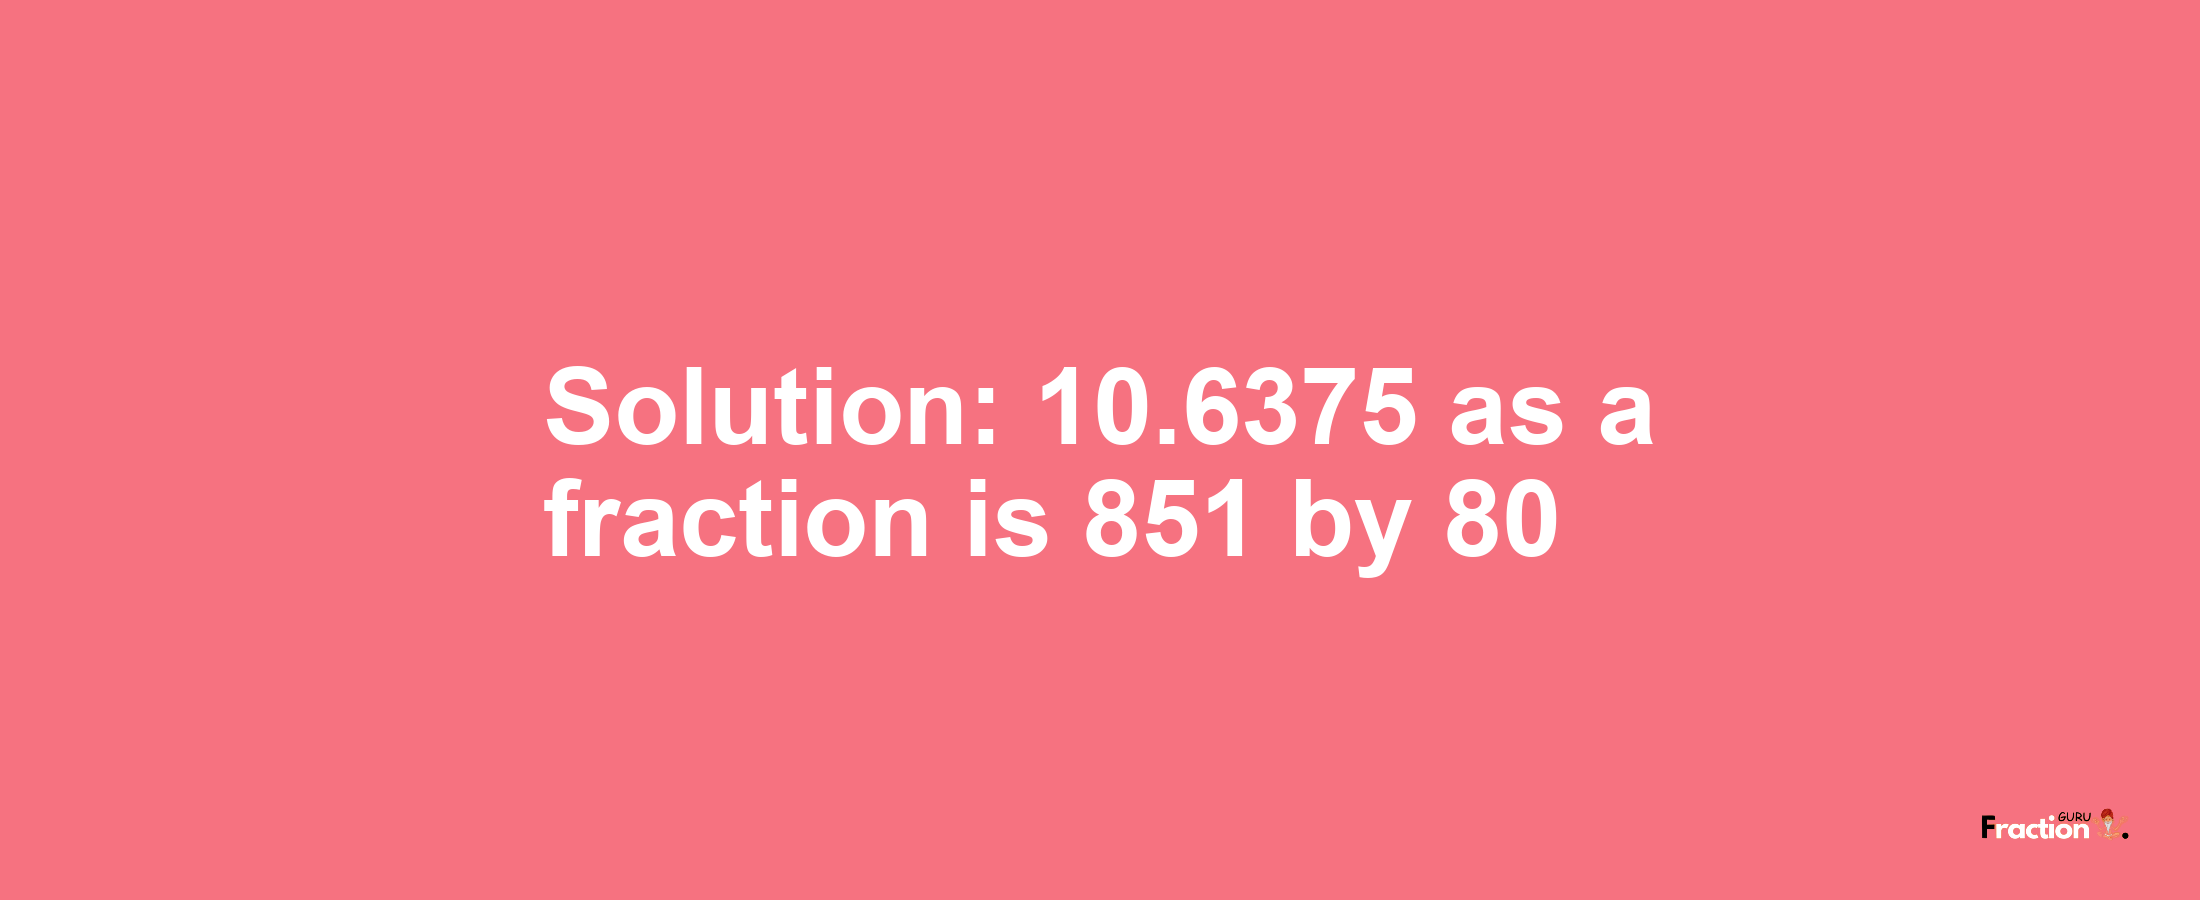 Solution:10.6375 as a fraction is 851/80